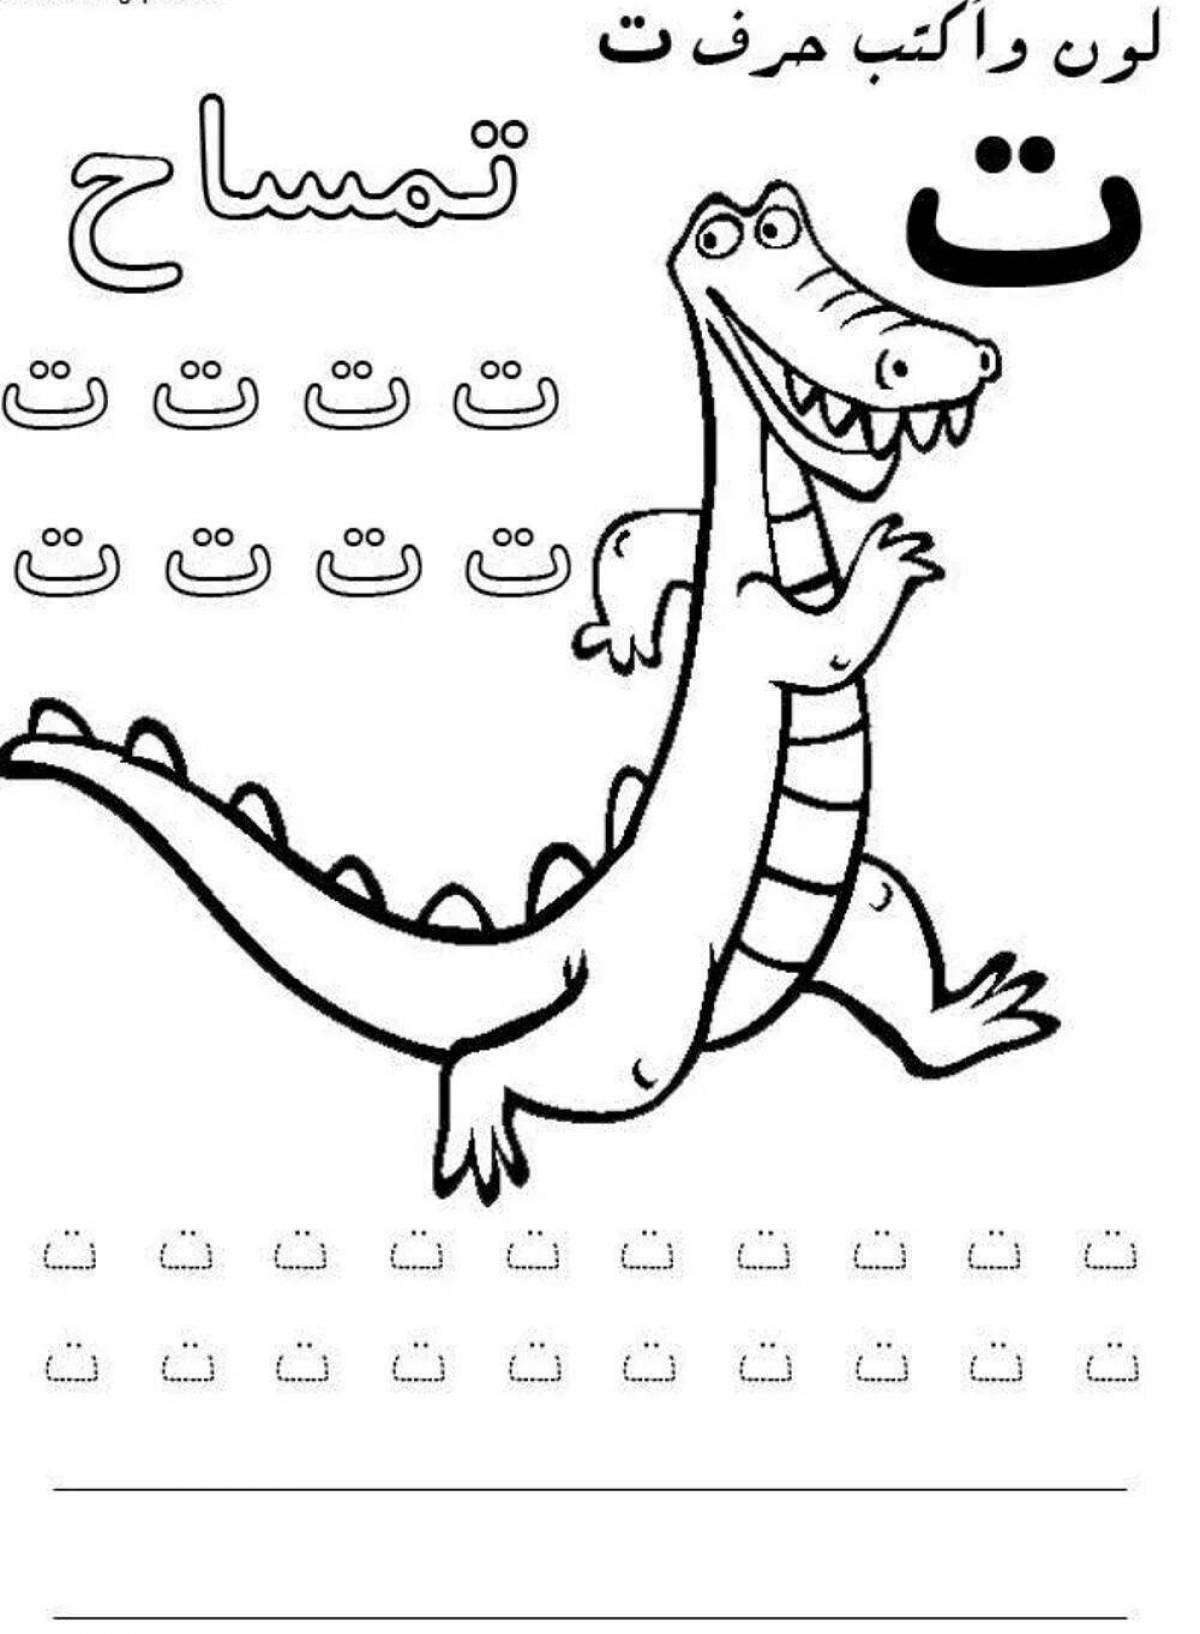 Colorful arabic alphabet coloring page for kids of all nationalities